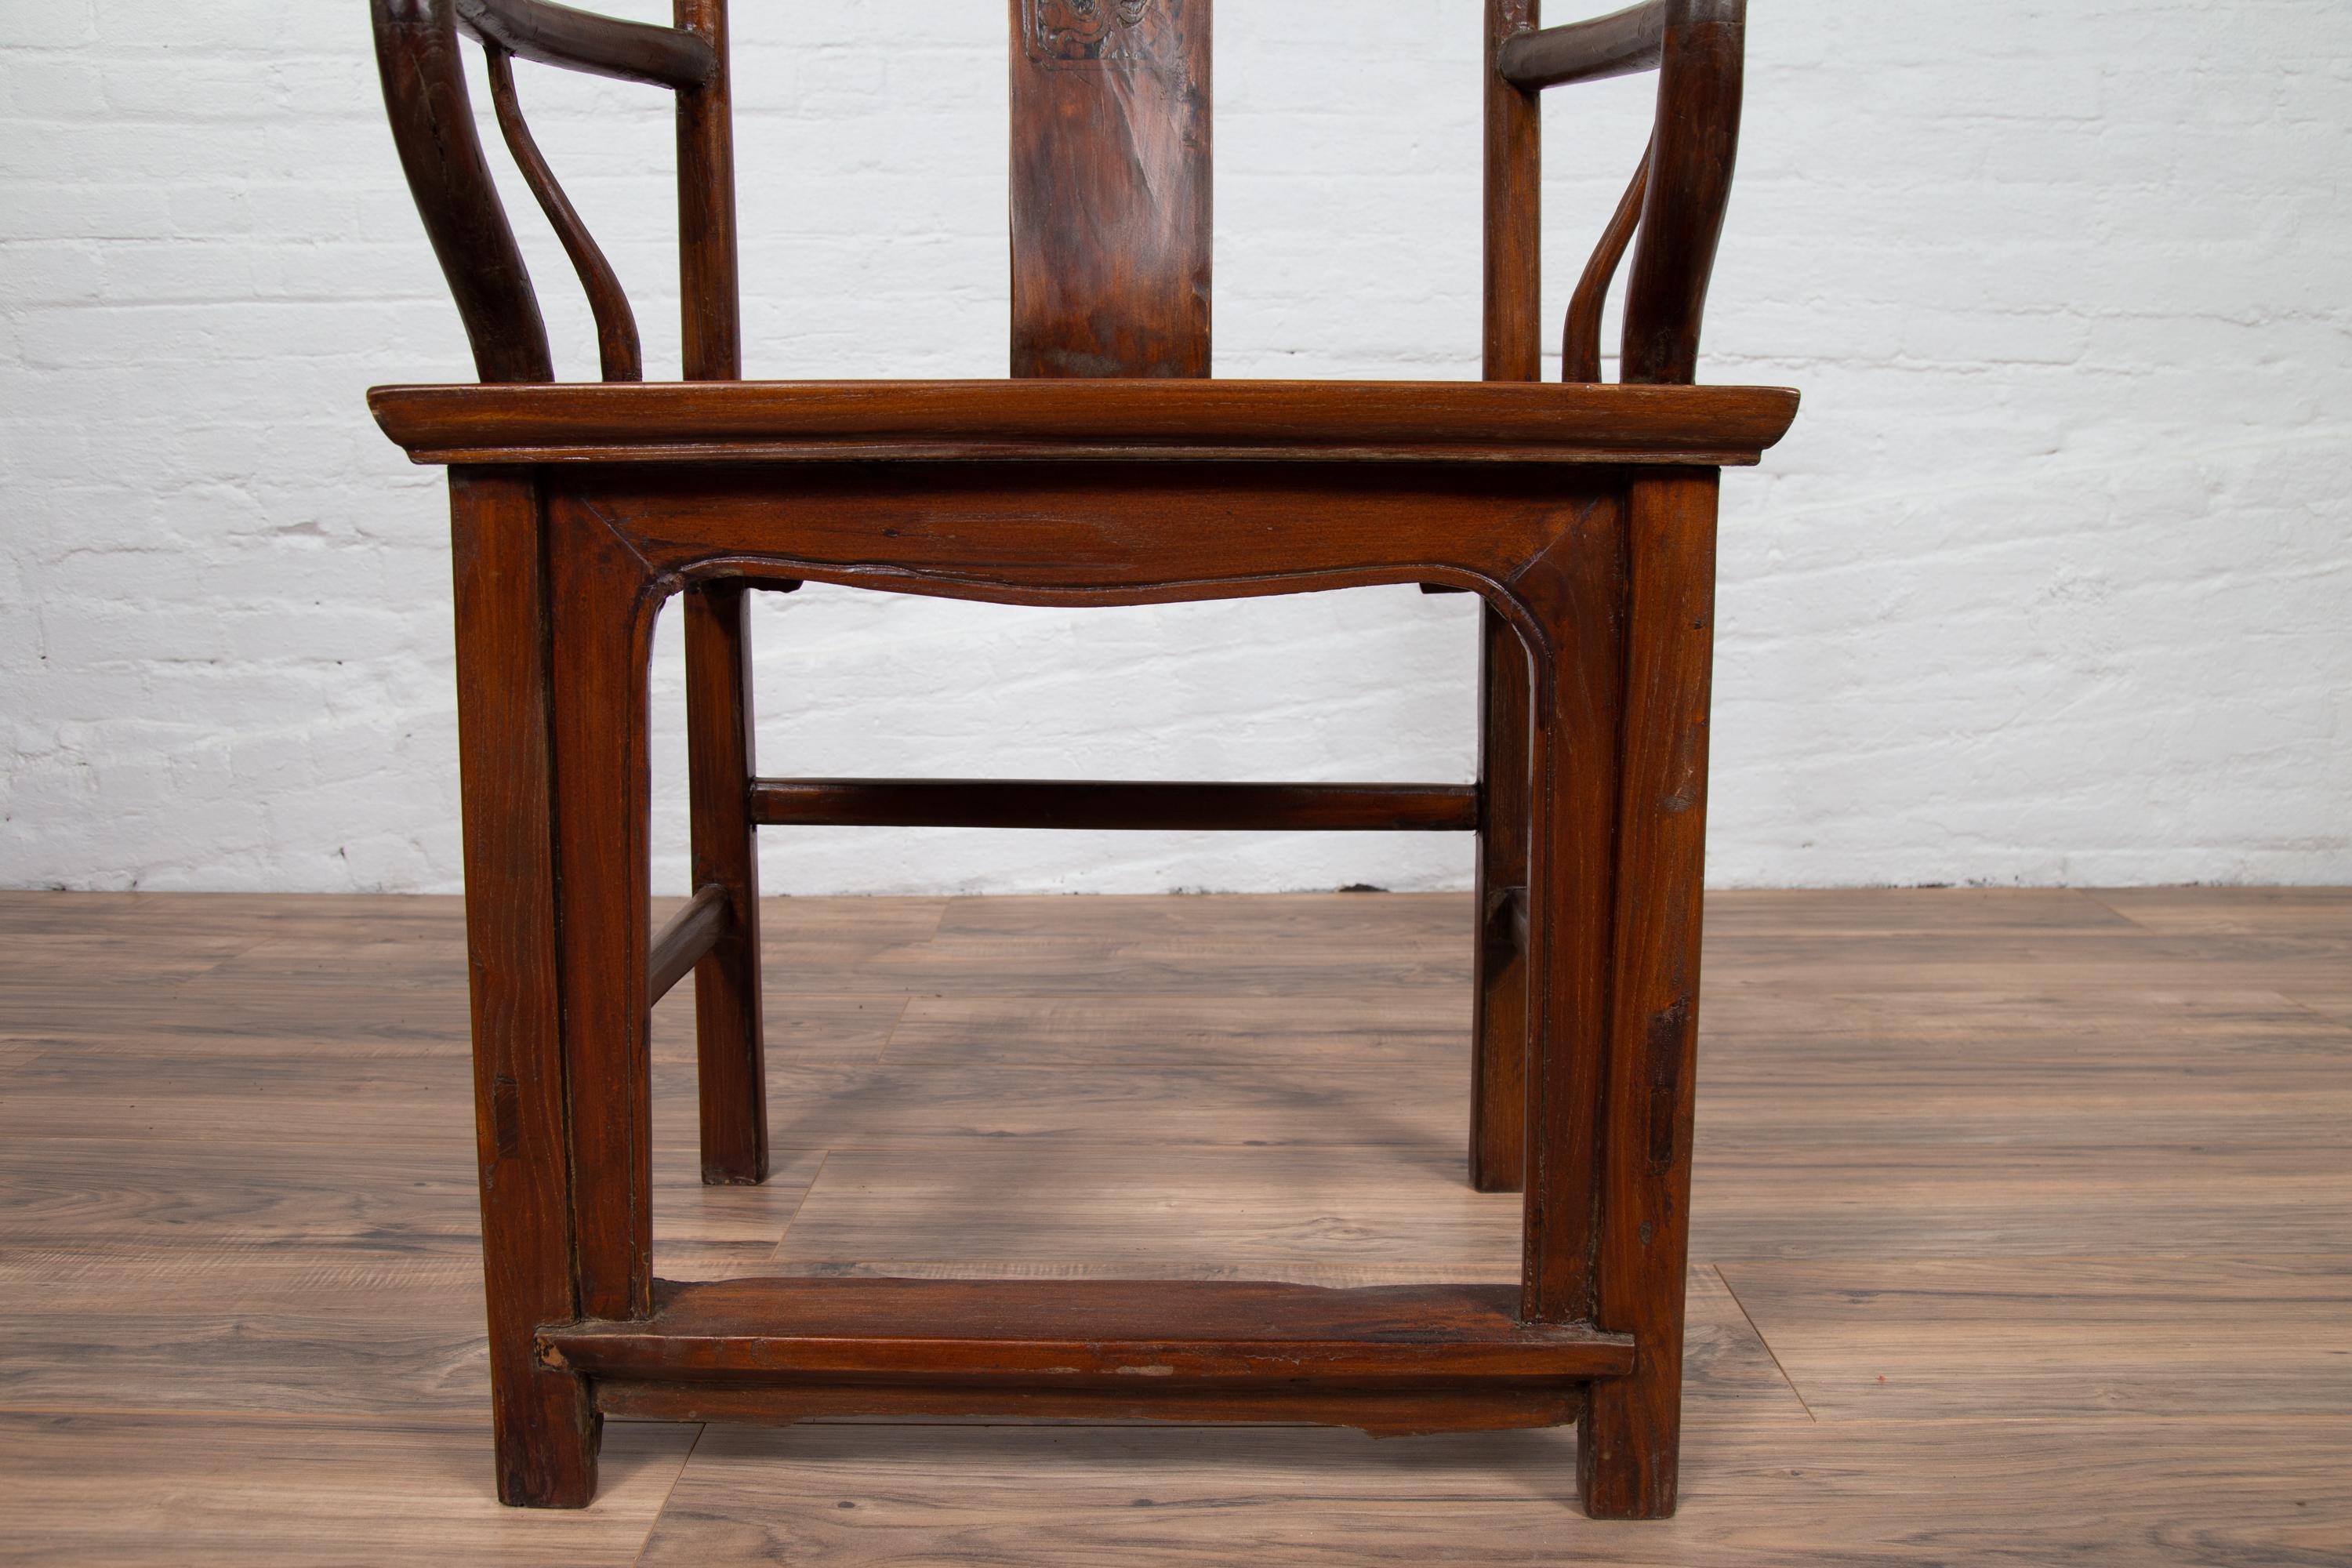 Ming Dynasty Style Wooden Wedding Chair with Carved Medallion and Curving Arms In Good Condition For Sale In Yonkers, NY